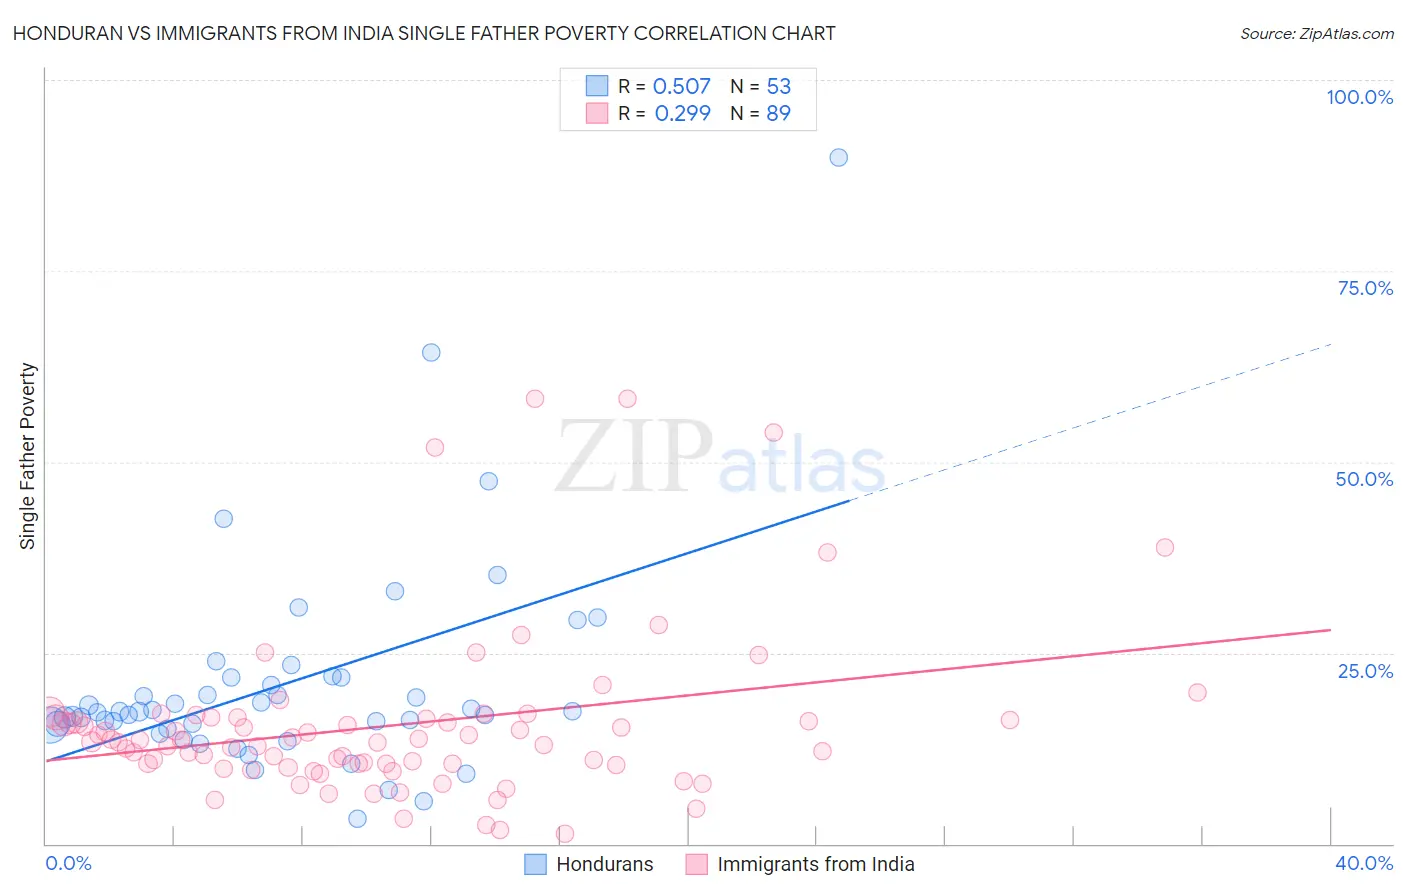 Honduran vs Immigrants from India Single Father Poverty